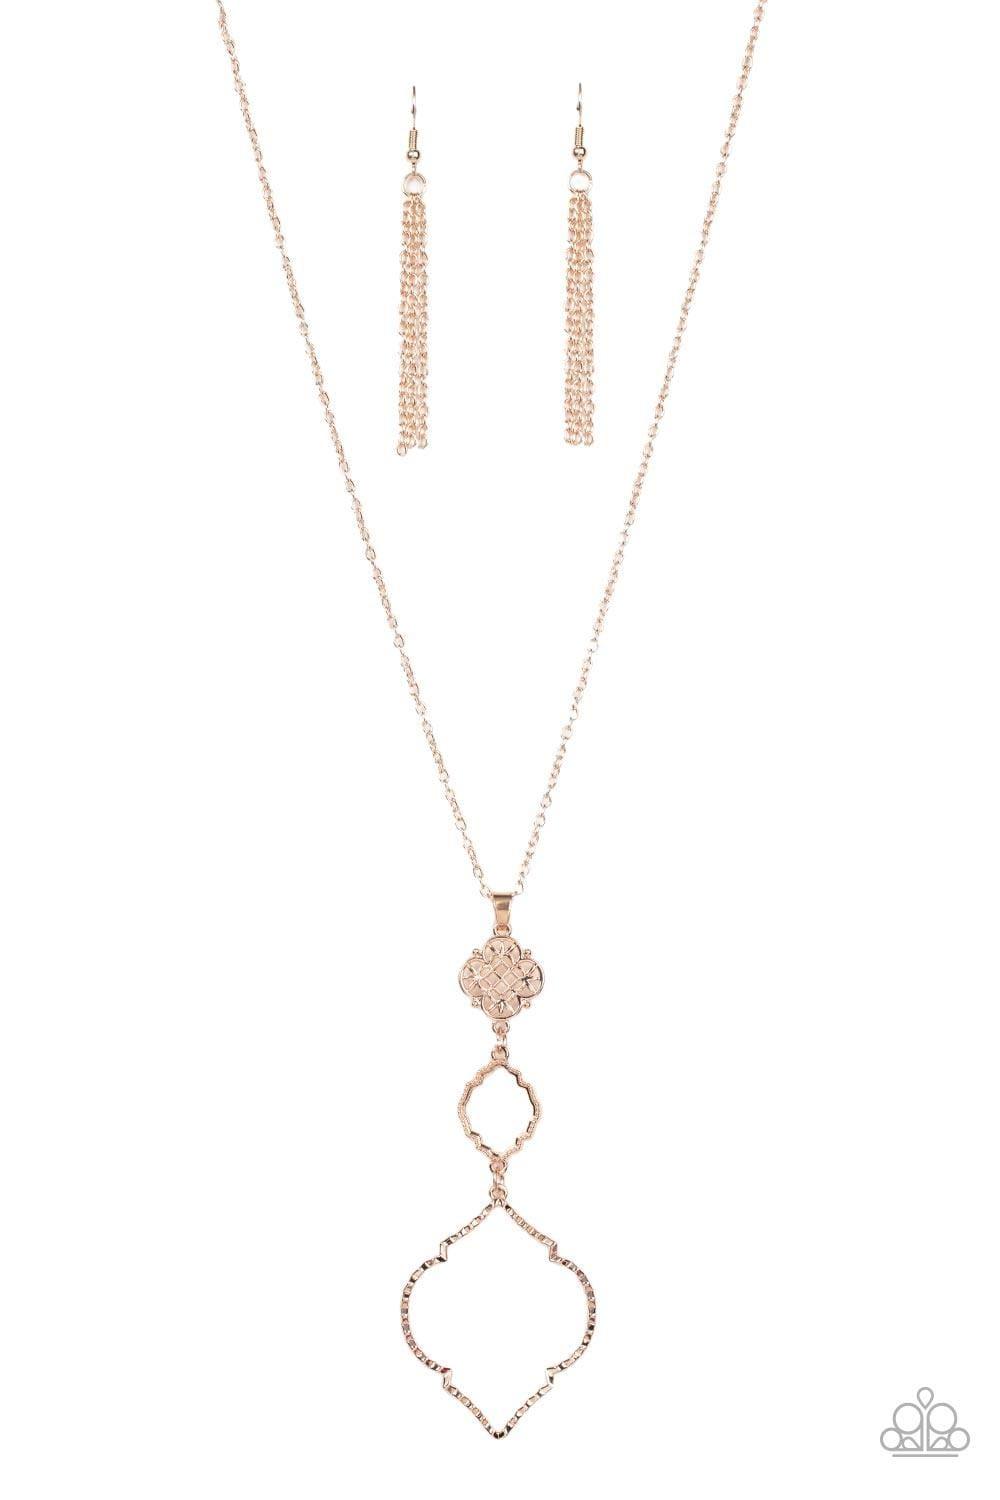 Paparazzi Accessories - Marrakesh Mystery - Rose Gold Necklace - Bling by JessieK